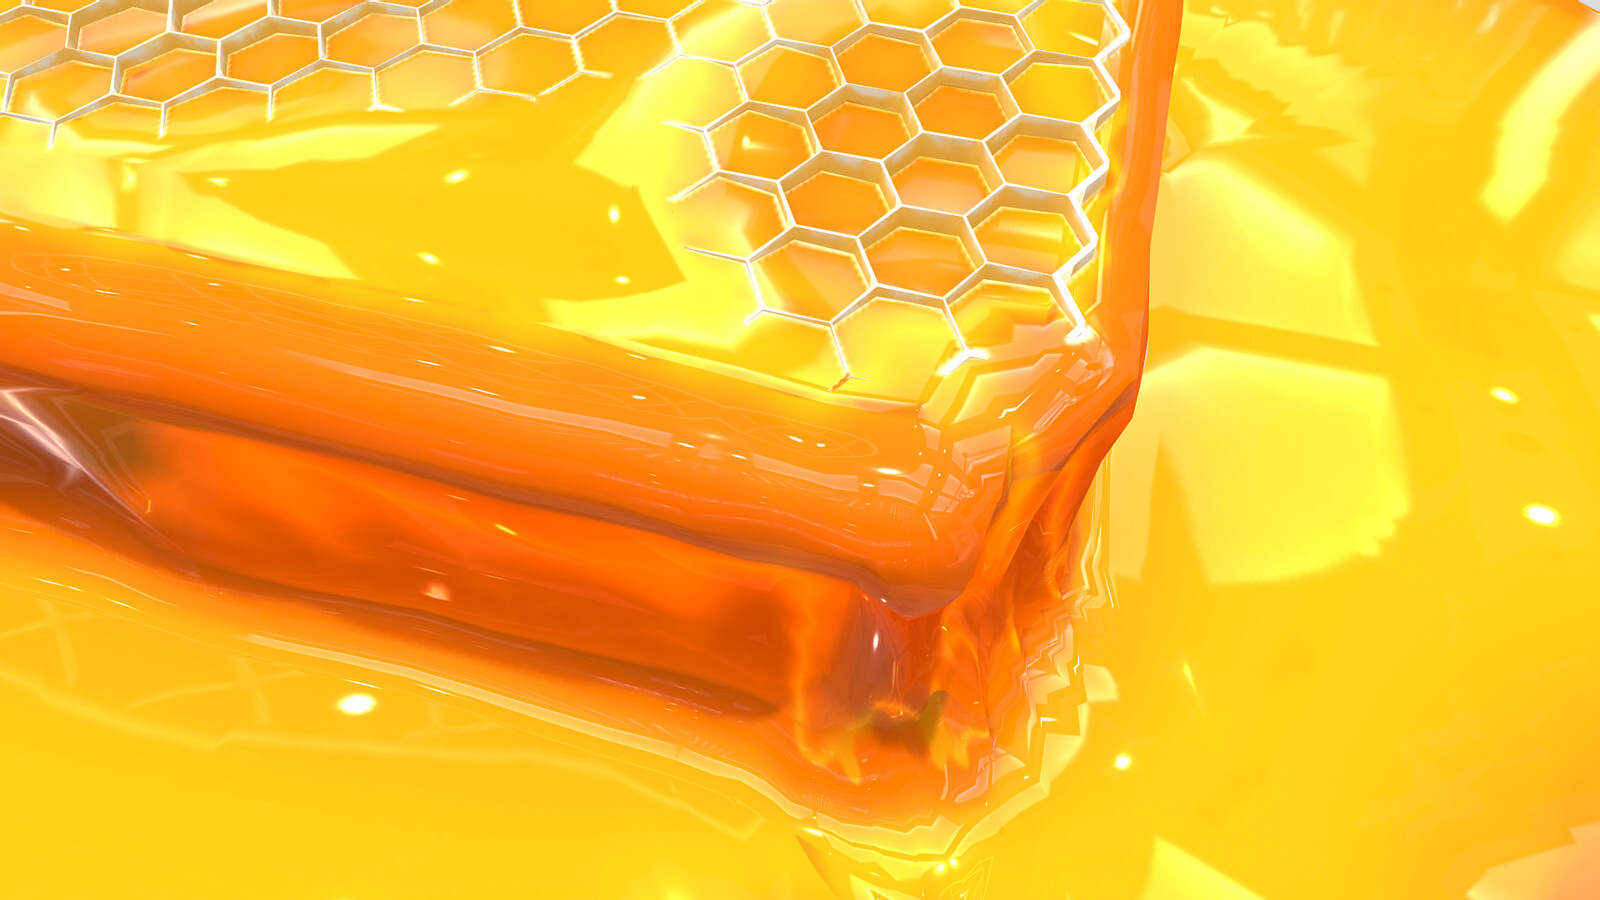 Honey and Comb - Detail